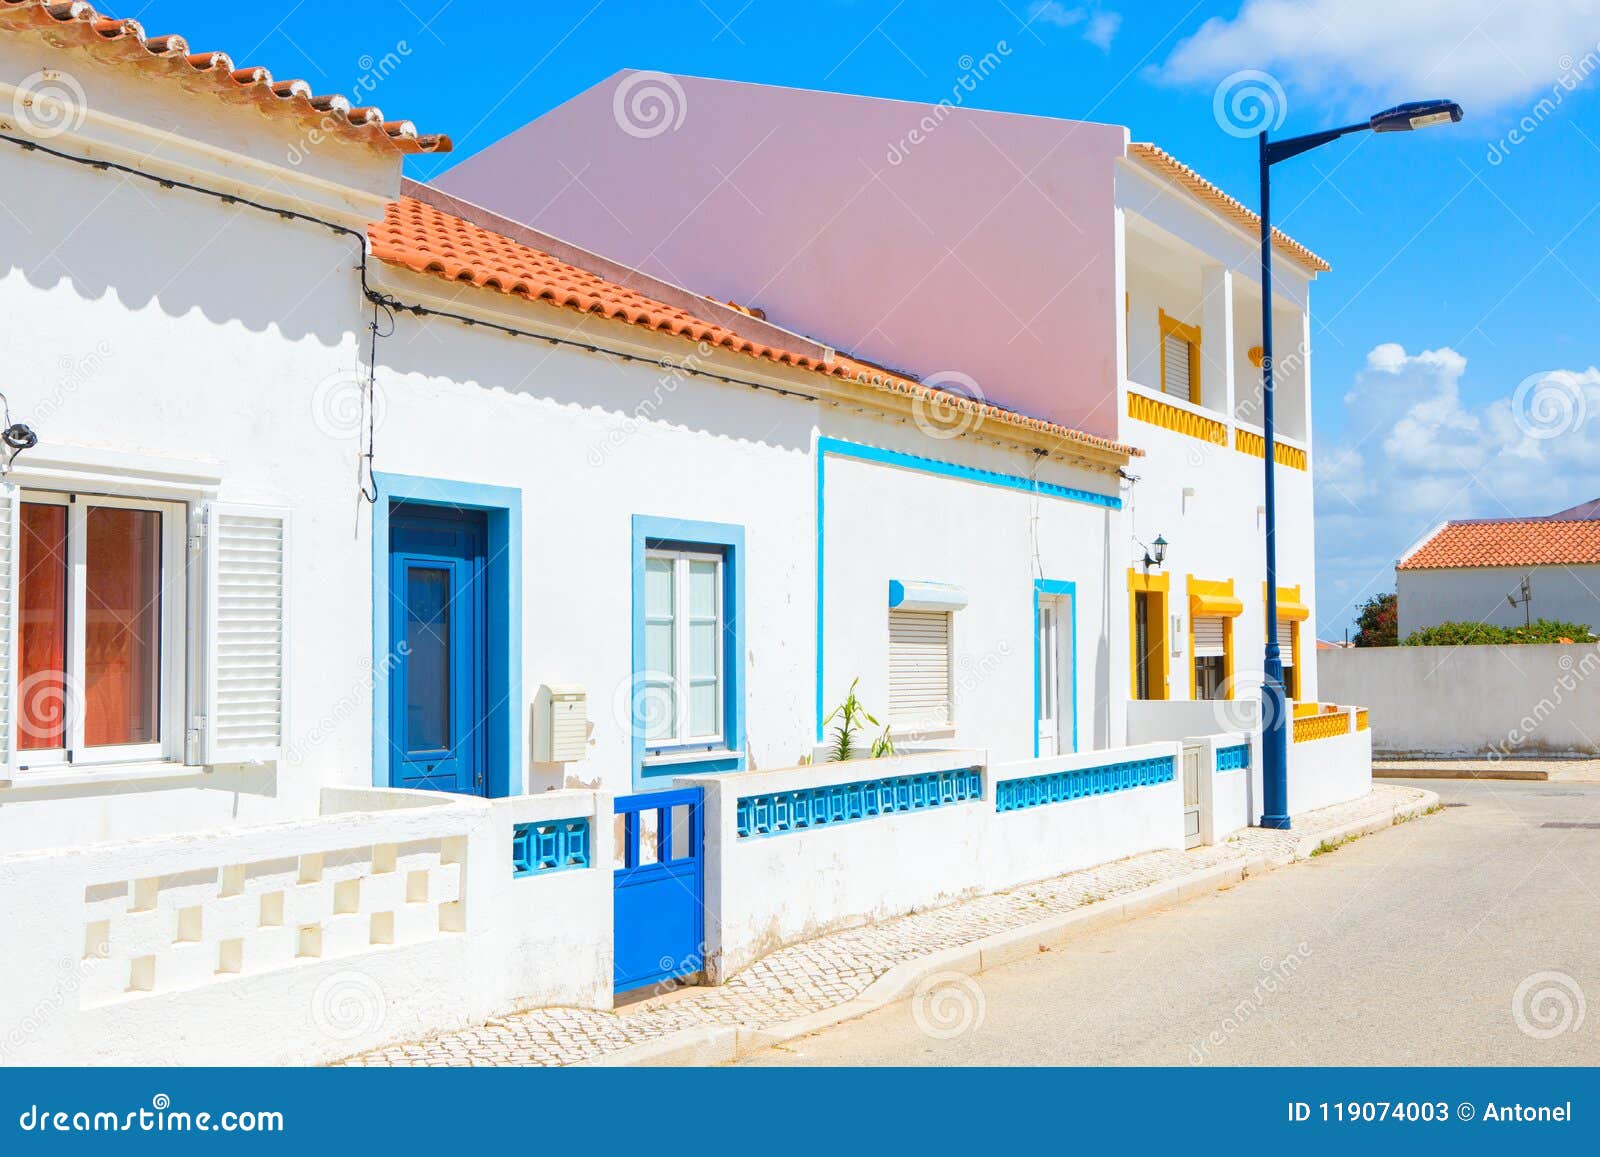 street with typical portuguese white houses in sagres, the municipality of vila do bispo, southern algarve of portugal